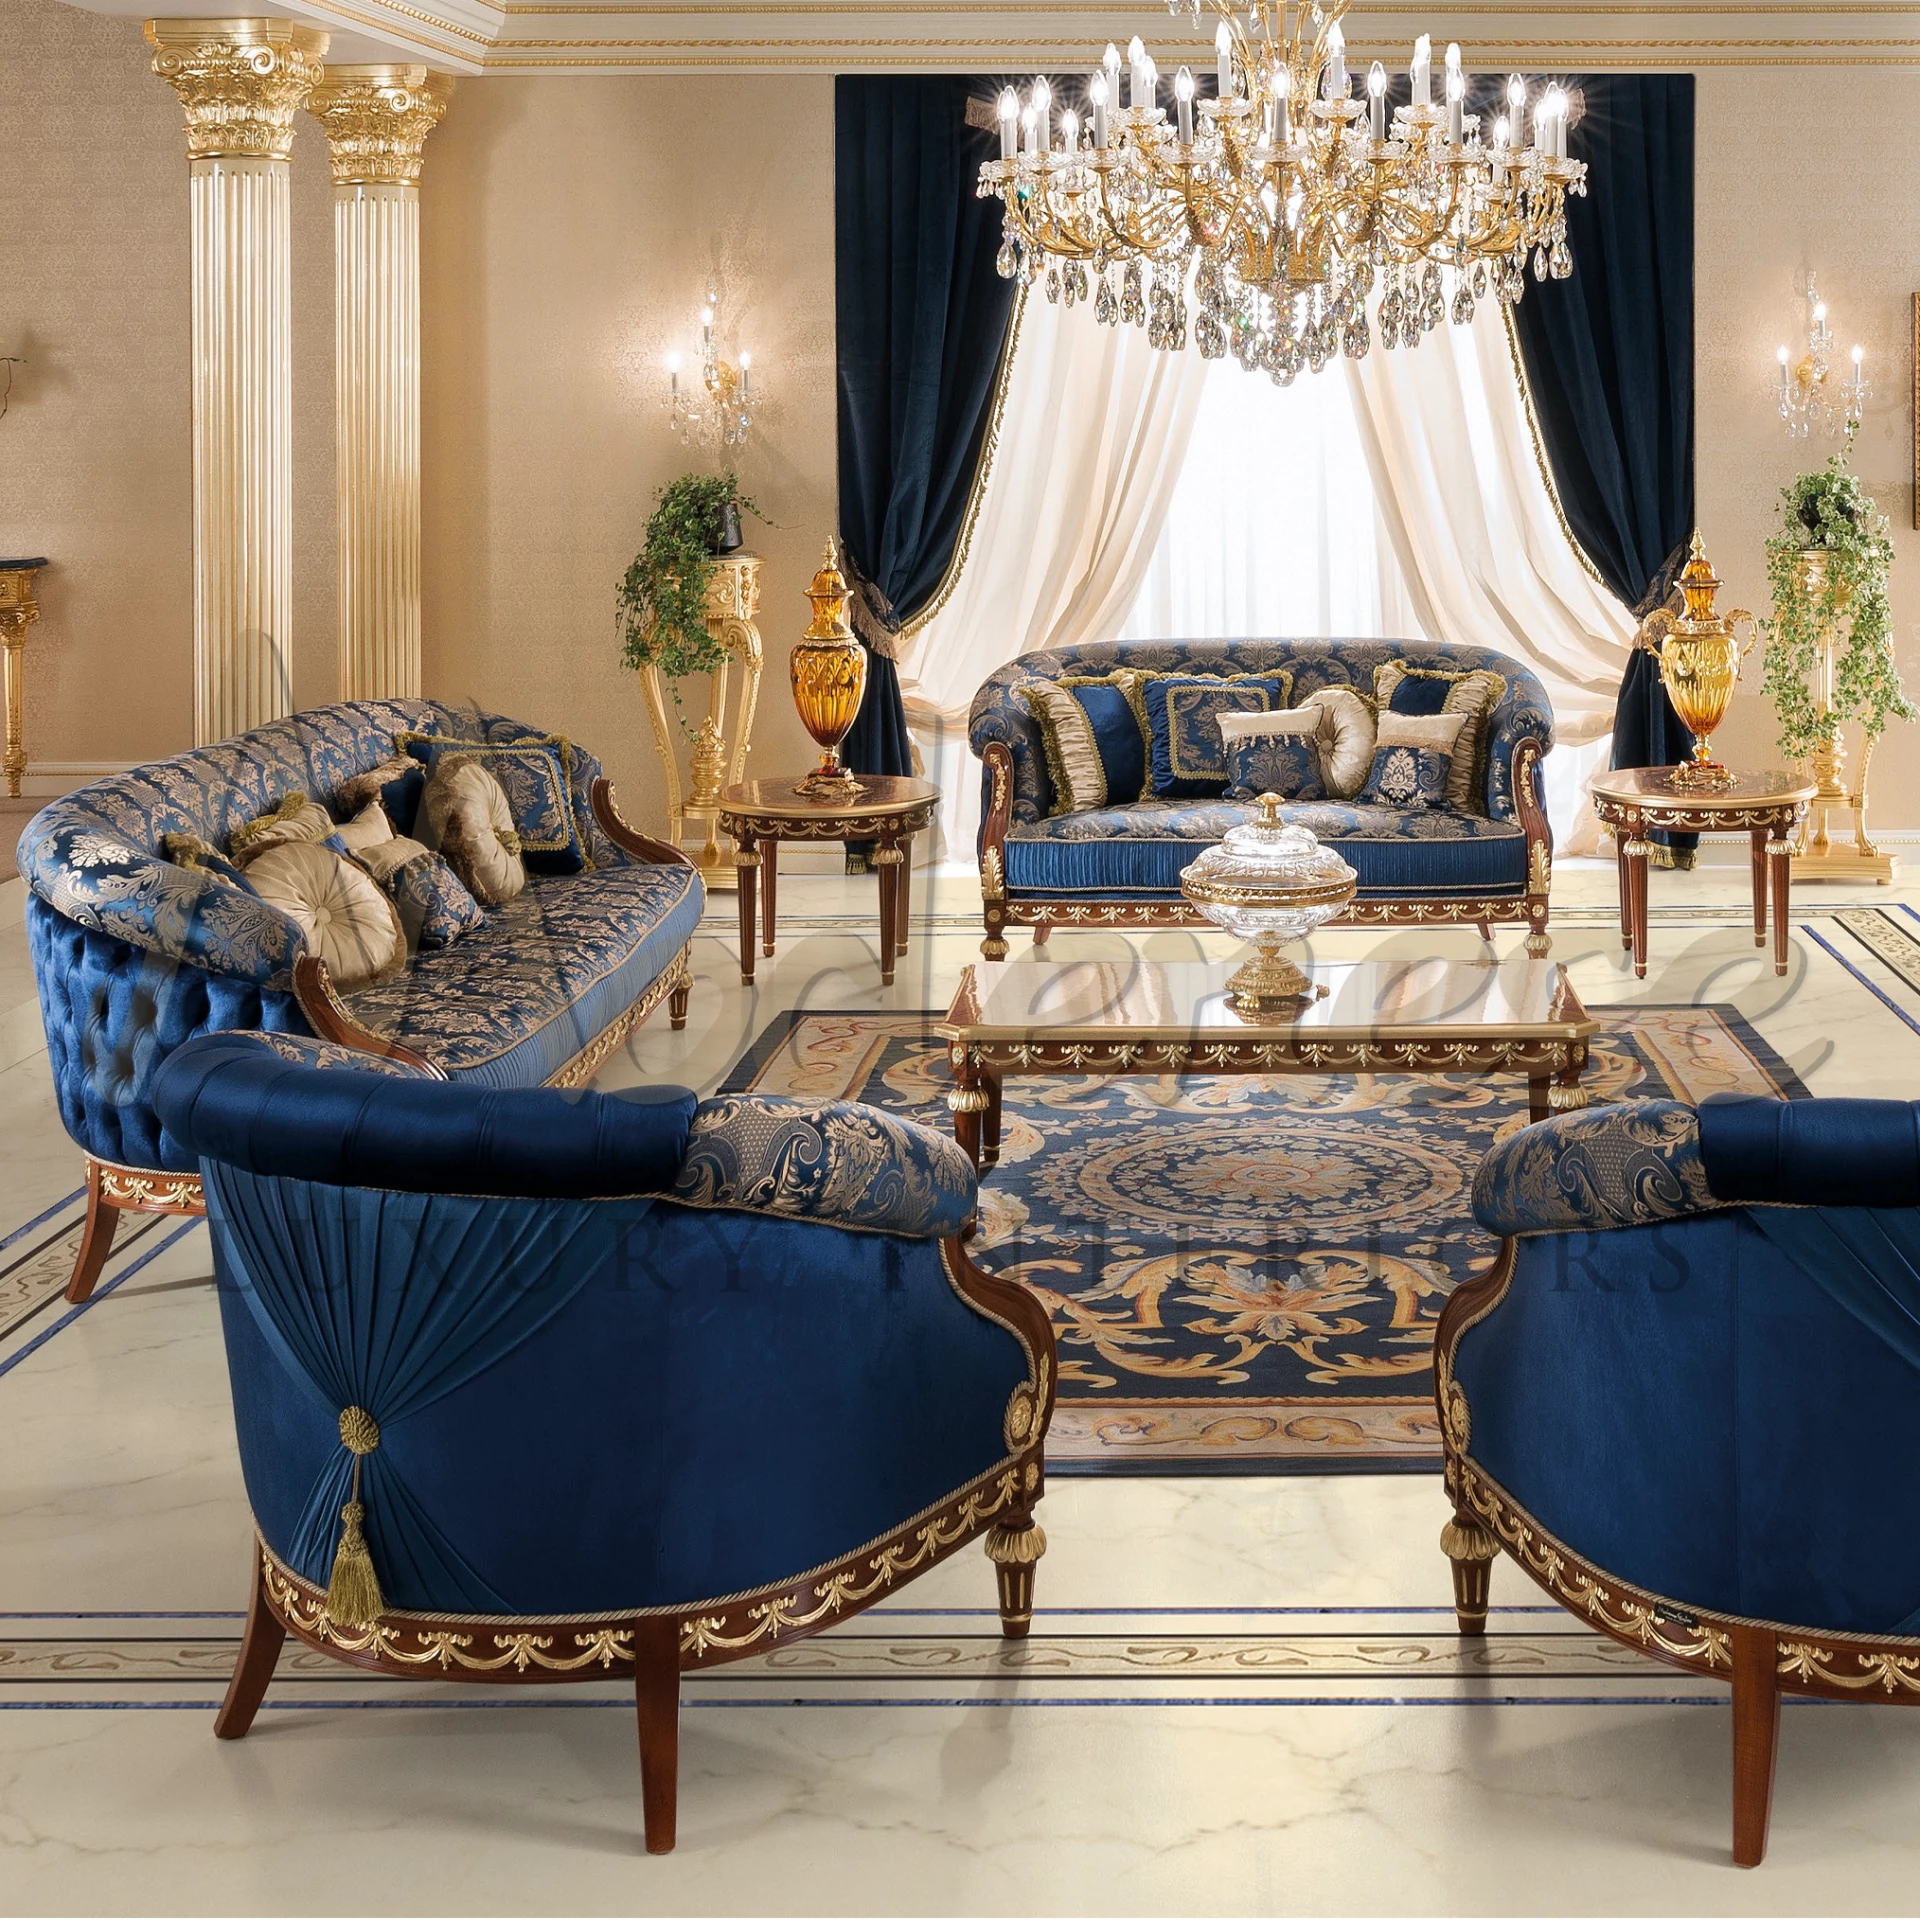 Opulent Royal Blue Cushion featuring embroidered accents and decorative motifs, a testament to Italian luxury and craftsmanship.